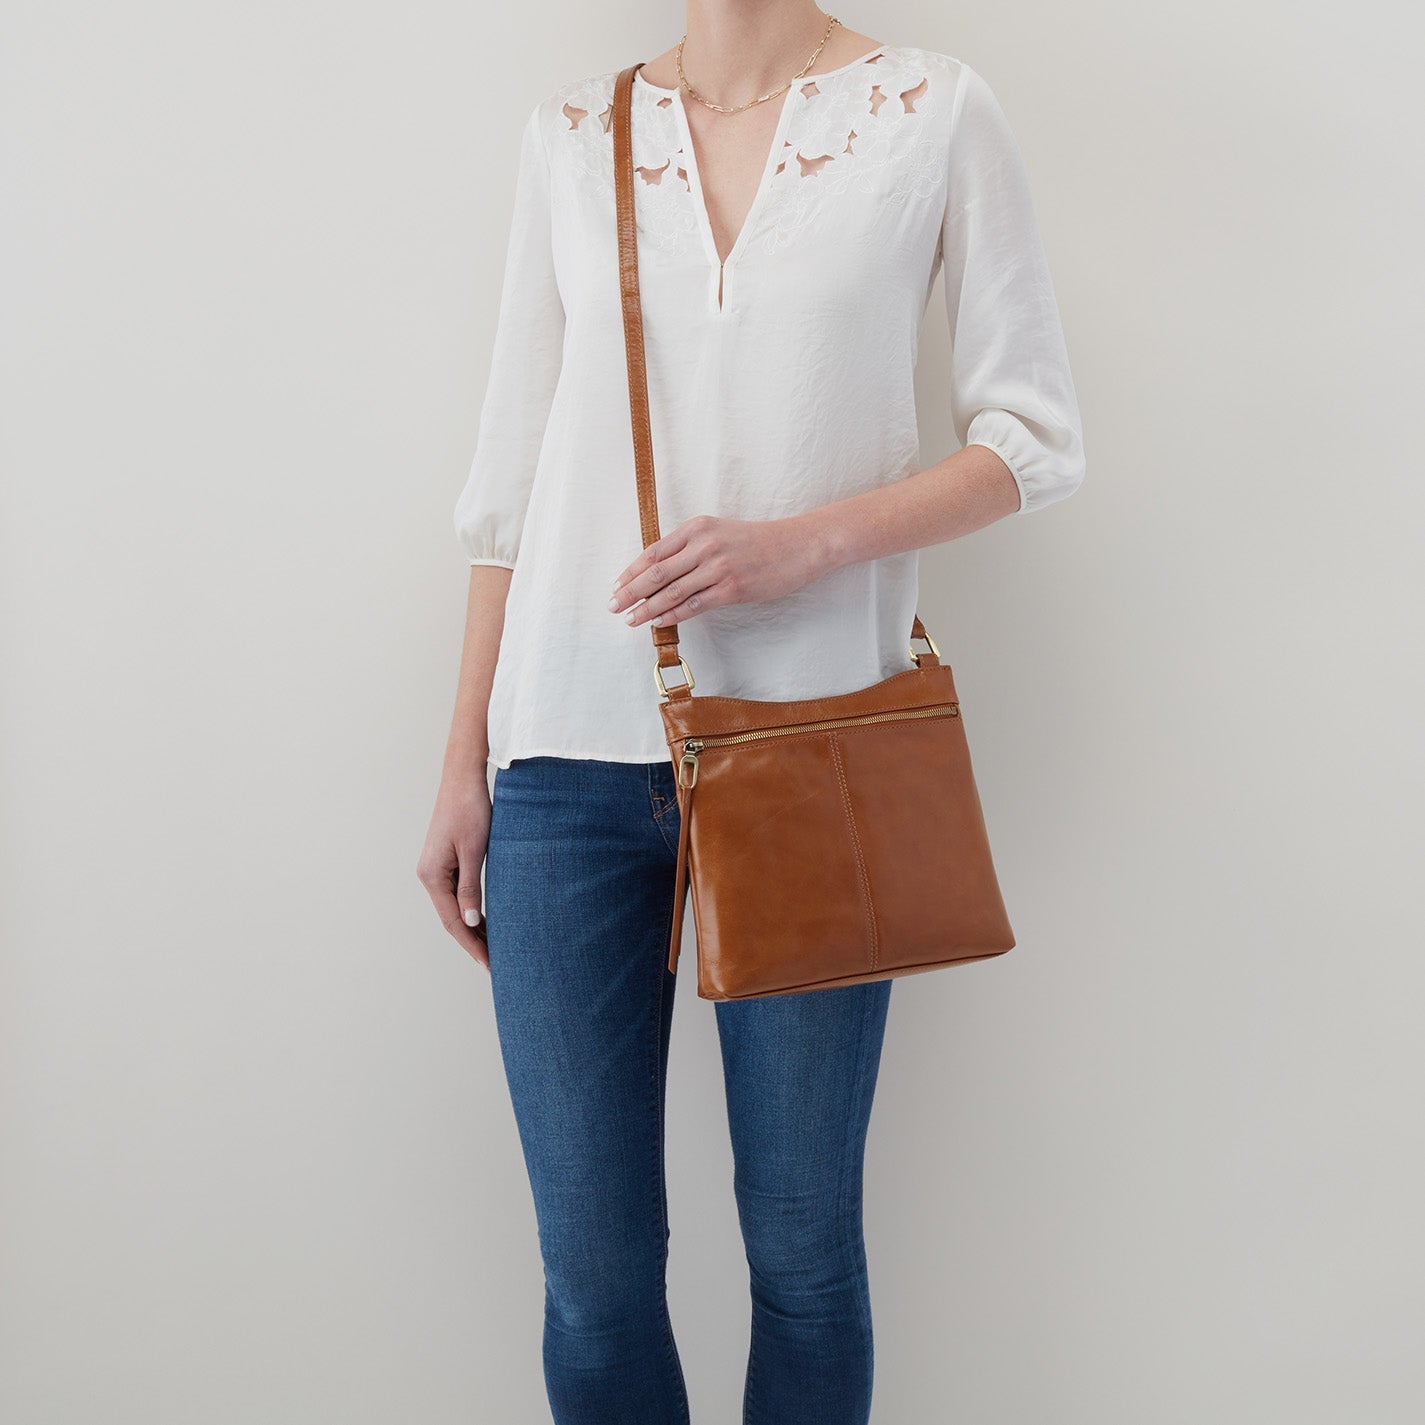 person wearing jeans and a white top with natural Cambel Crossbody over the shoulder.